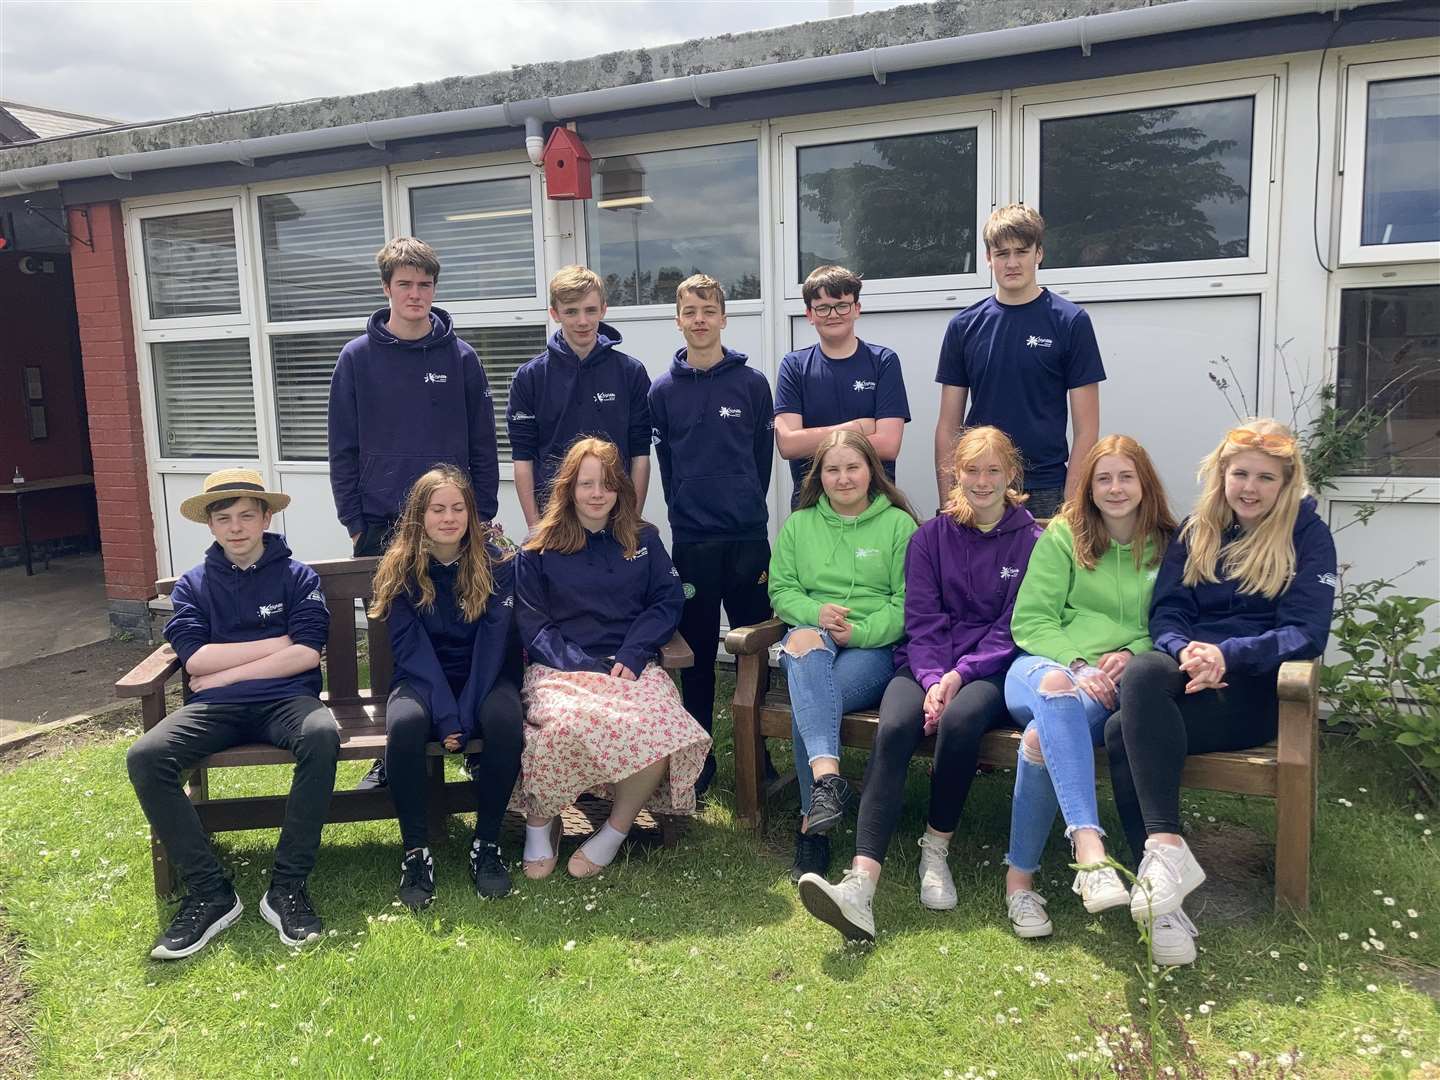 The young leaders, back row, from left: Finlay Anderson, James Magee, Lee Gordon, Cameron Anderson, Rowan Anderson. Front row, from left: Aiden Morrison, Ngaire Beveridge, Maisie Gunn, Neve Murray, Gerli Coghill, Abbie Charlton and Hope Watson.